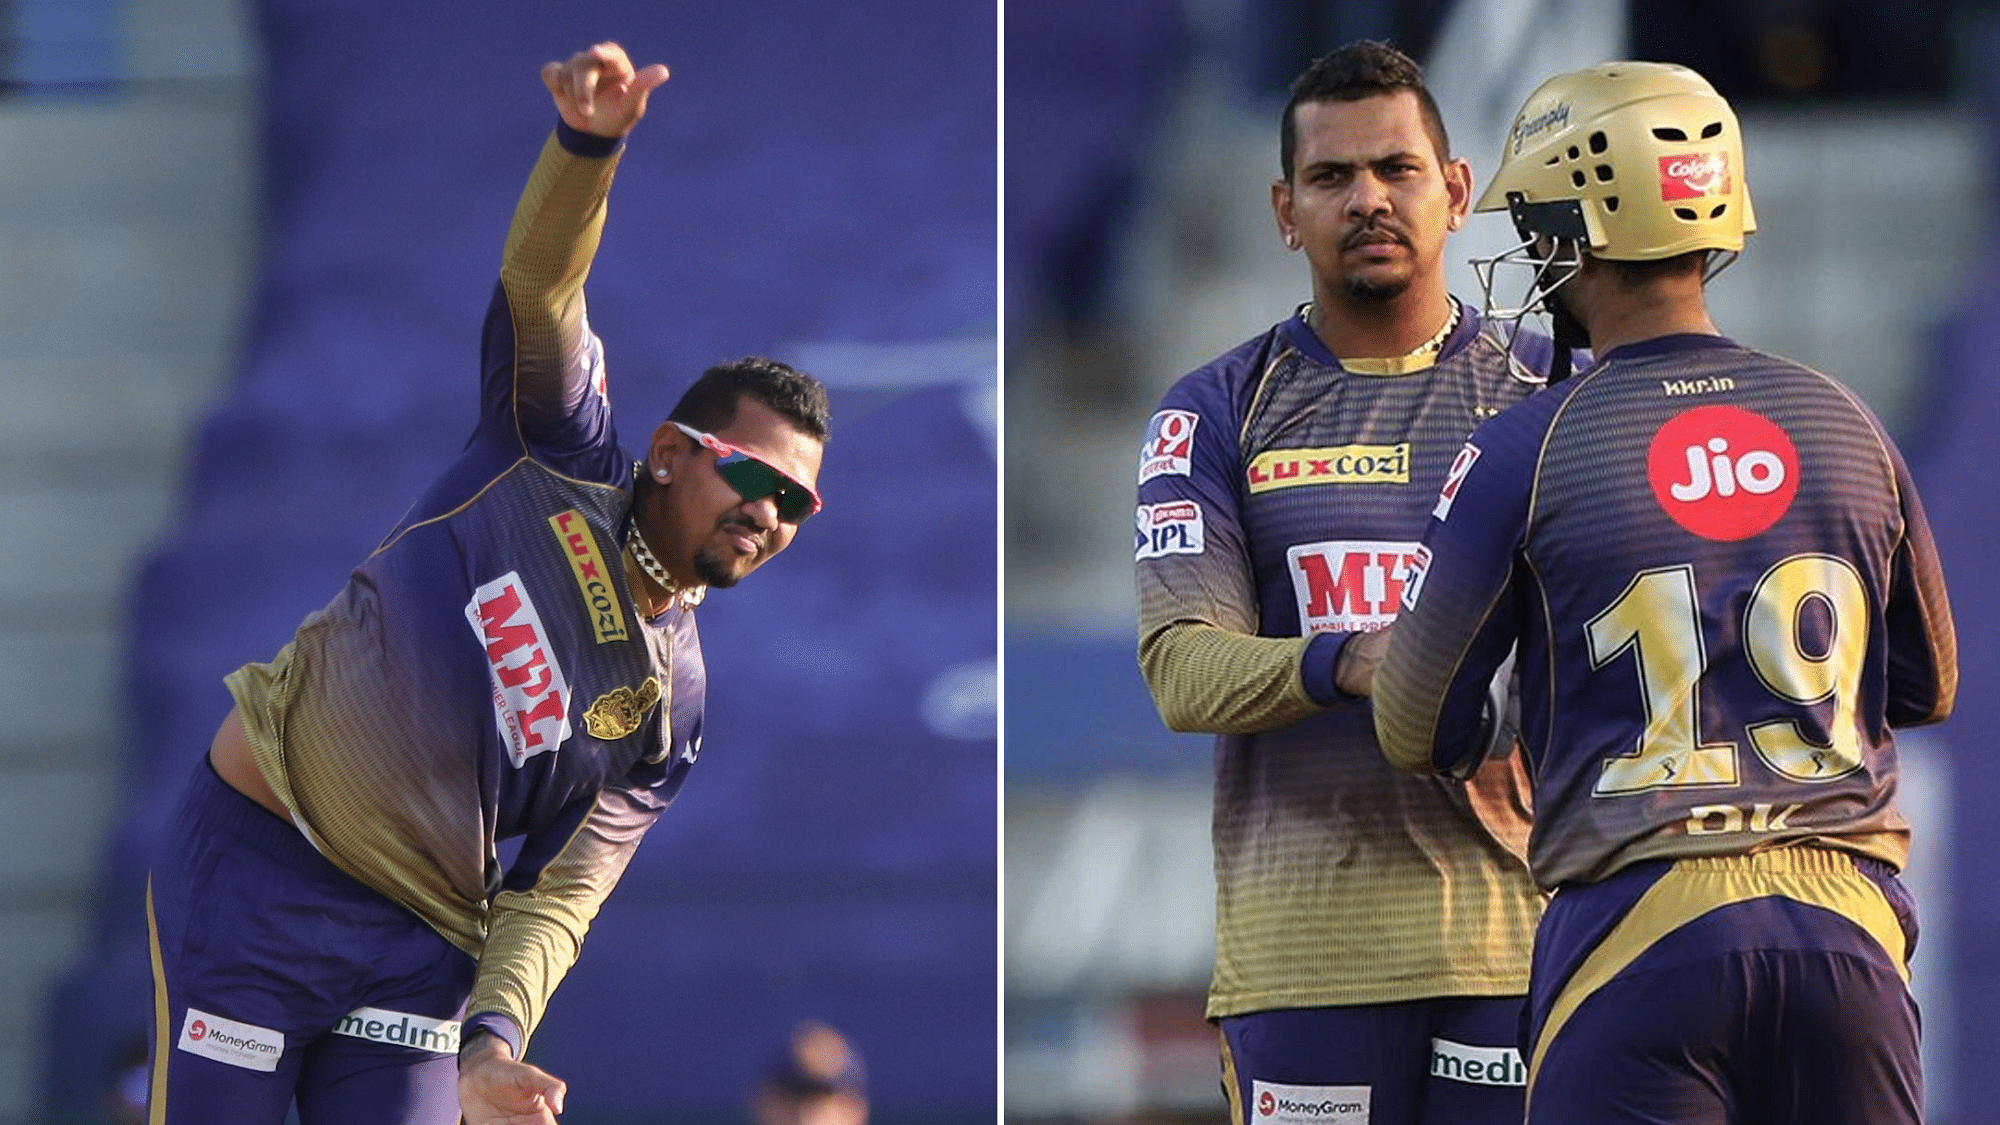 Kolkata Knight Riders’ spinner Sunil Narine has been taken off the Suspect Illegal Action Warning List after a careful review